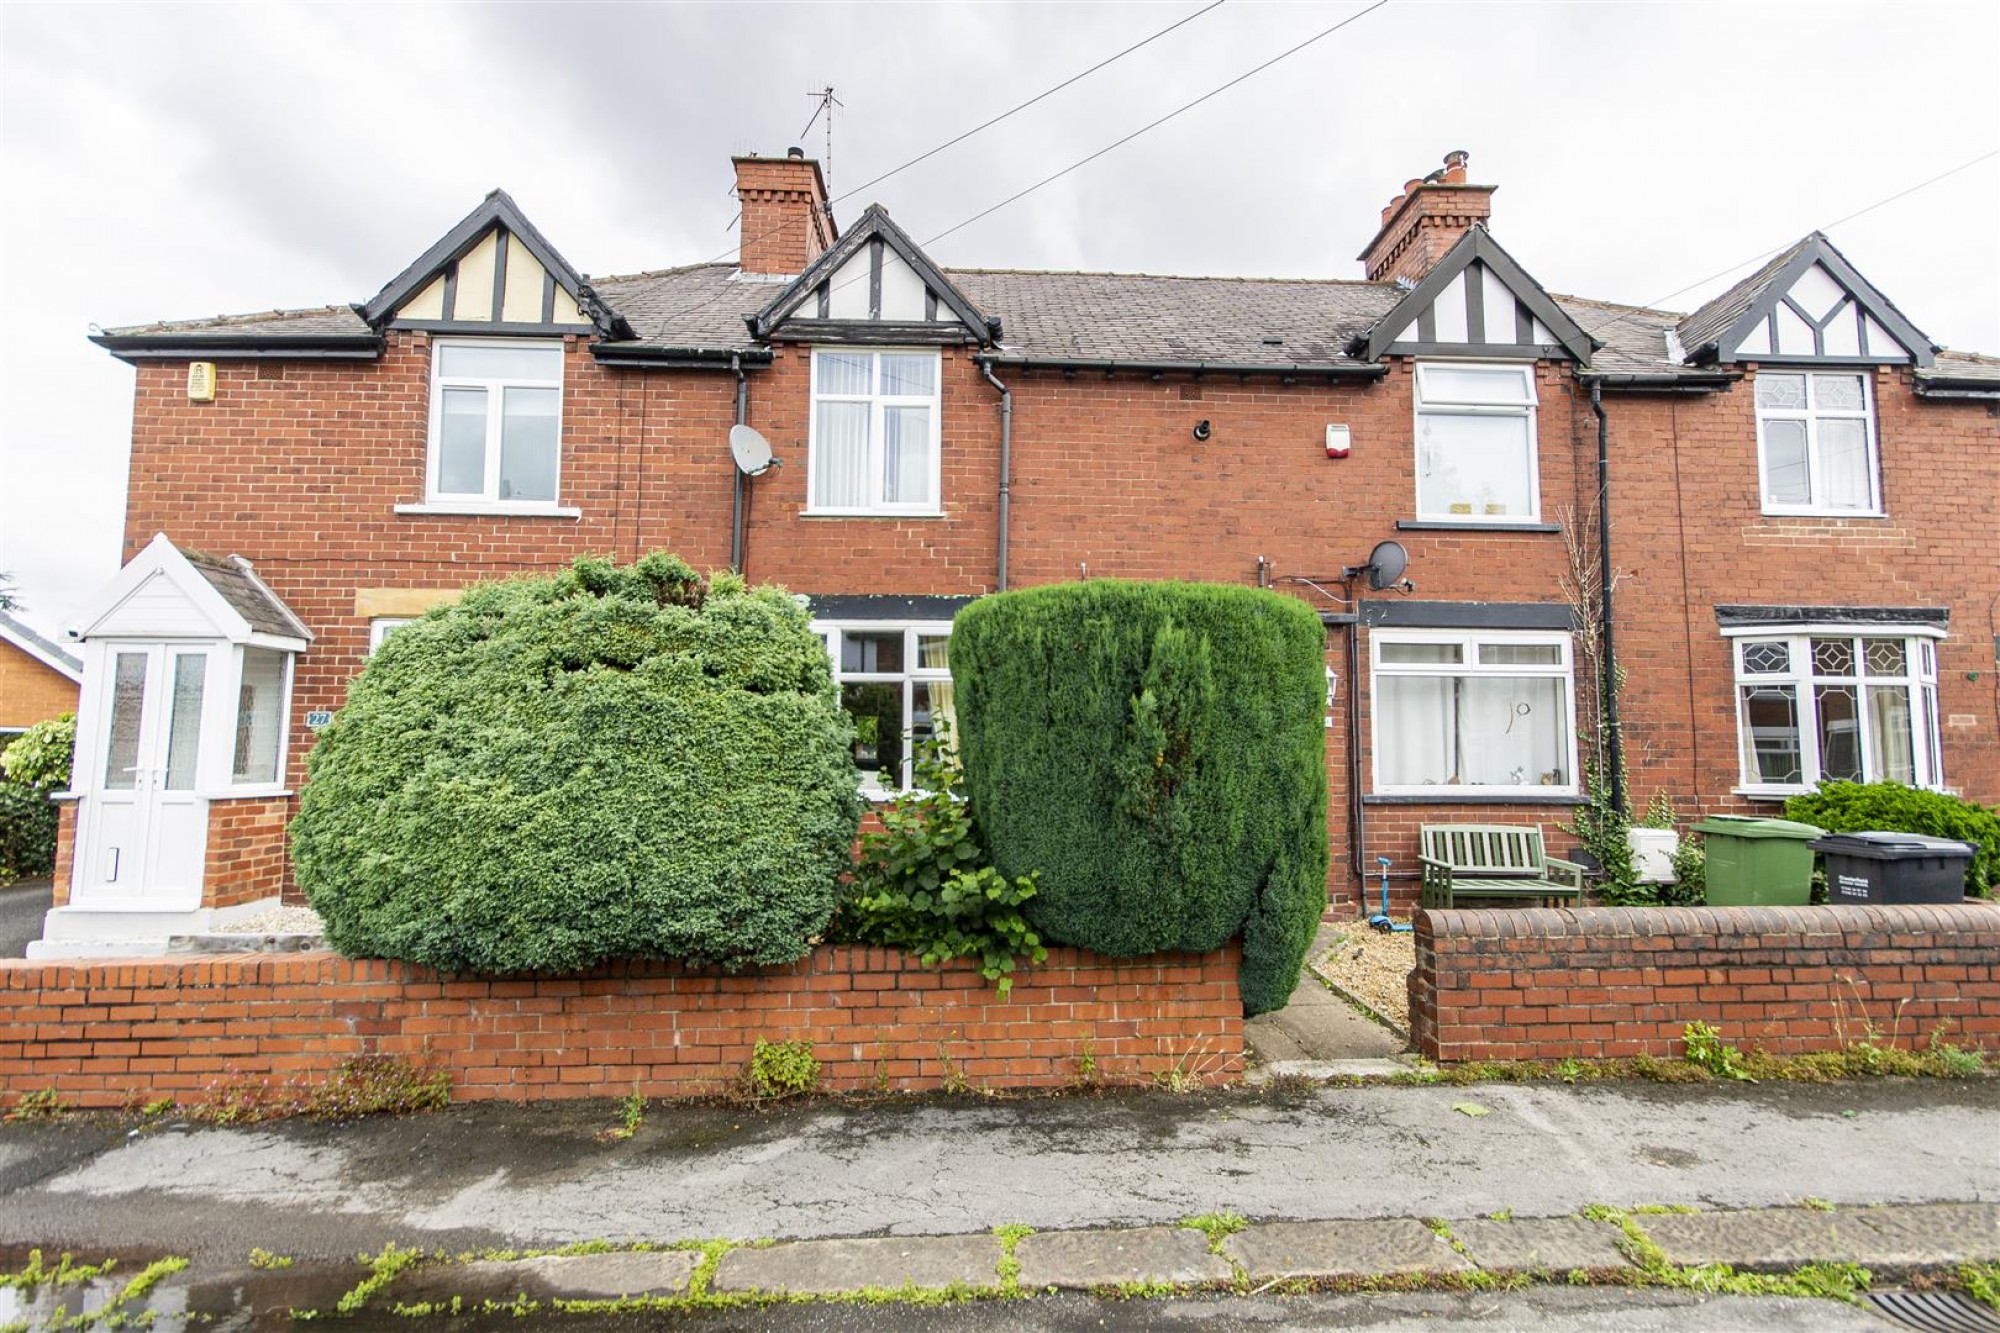 Devonshire Avenue East, Hasland, Chesterfield